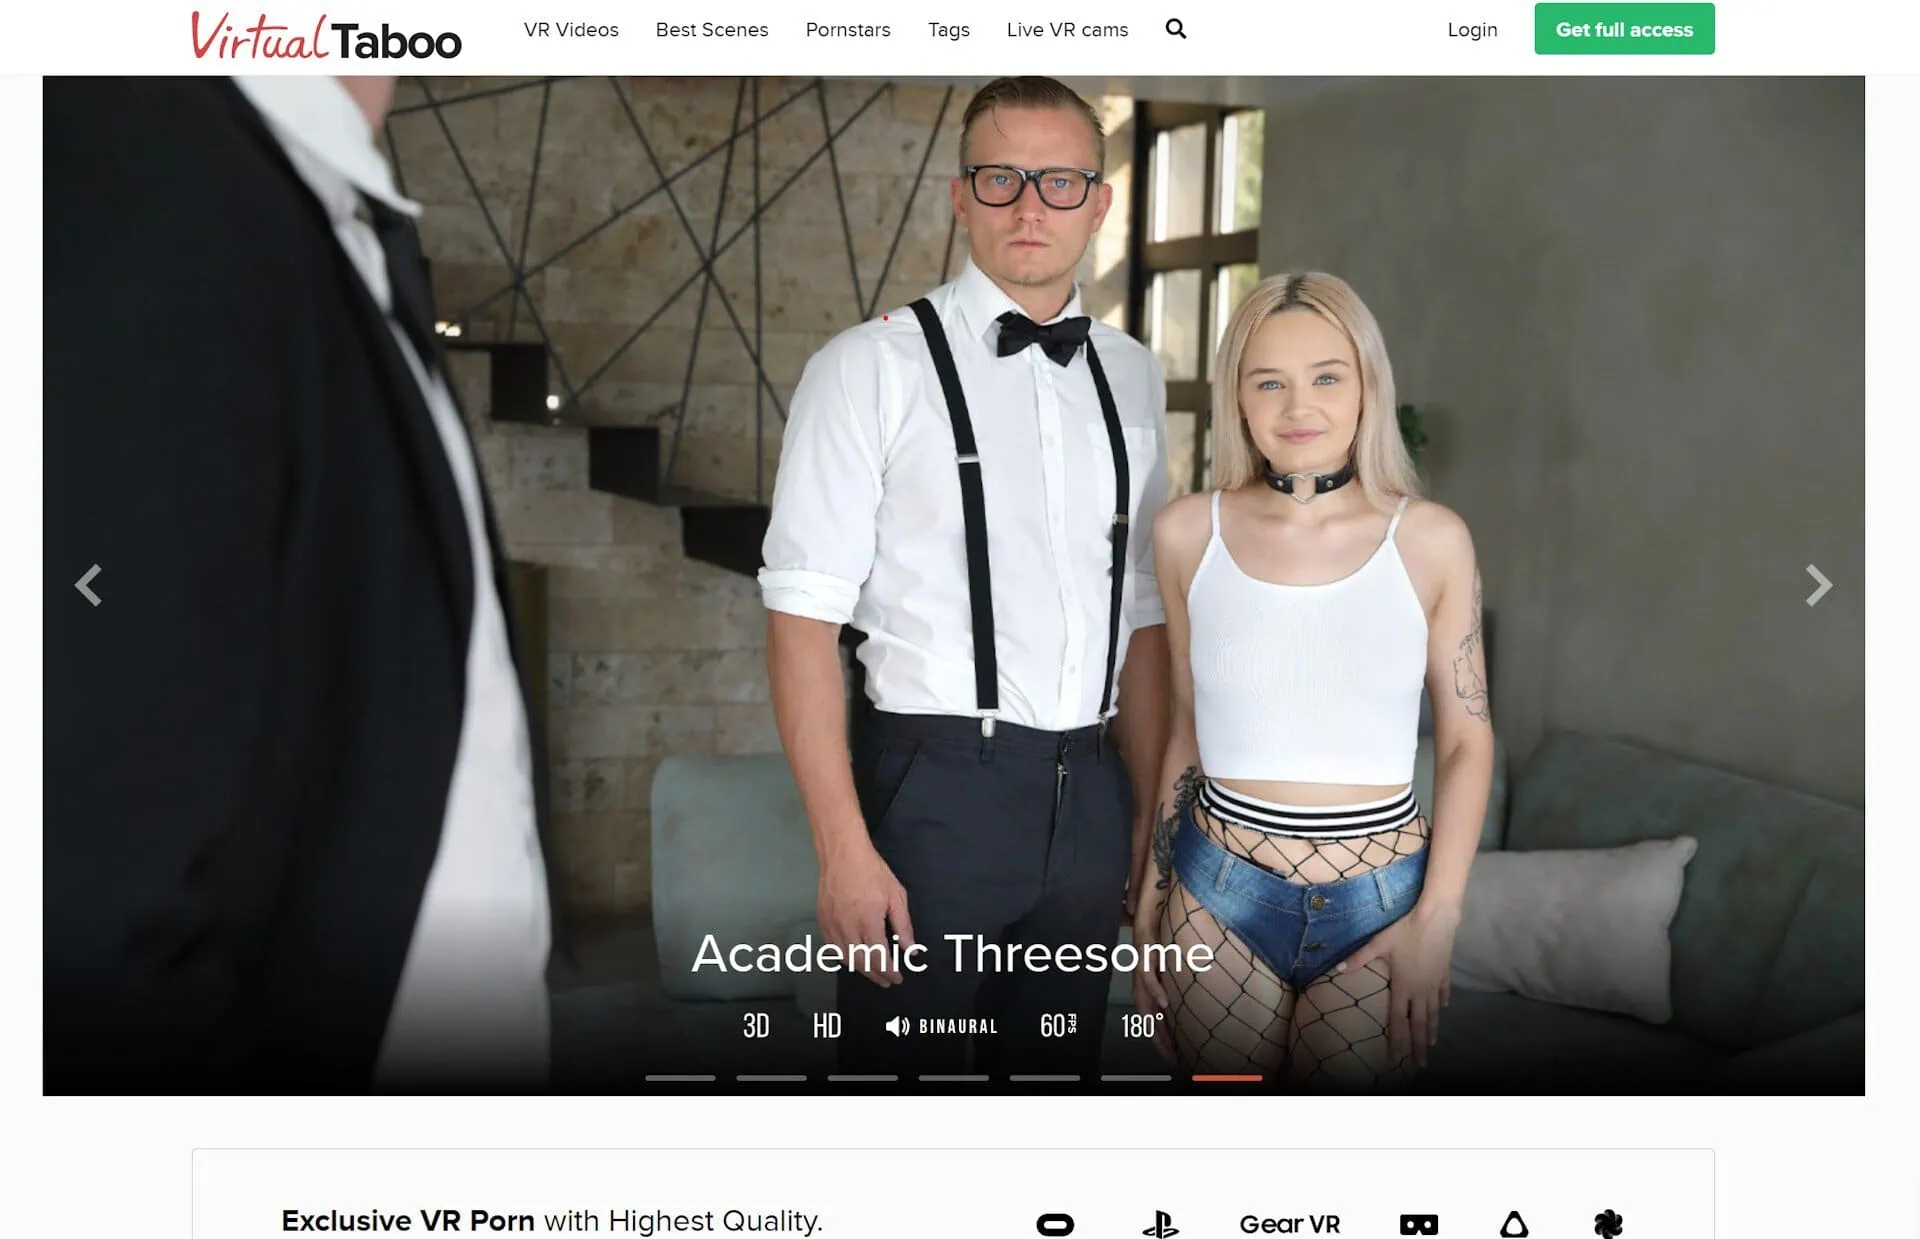 VirtualTaboo, a website featuring virtual reality porn. Screenshot by SEXTECHGUIDE